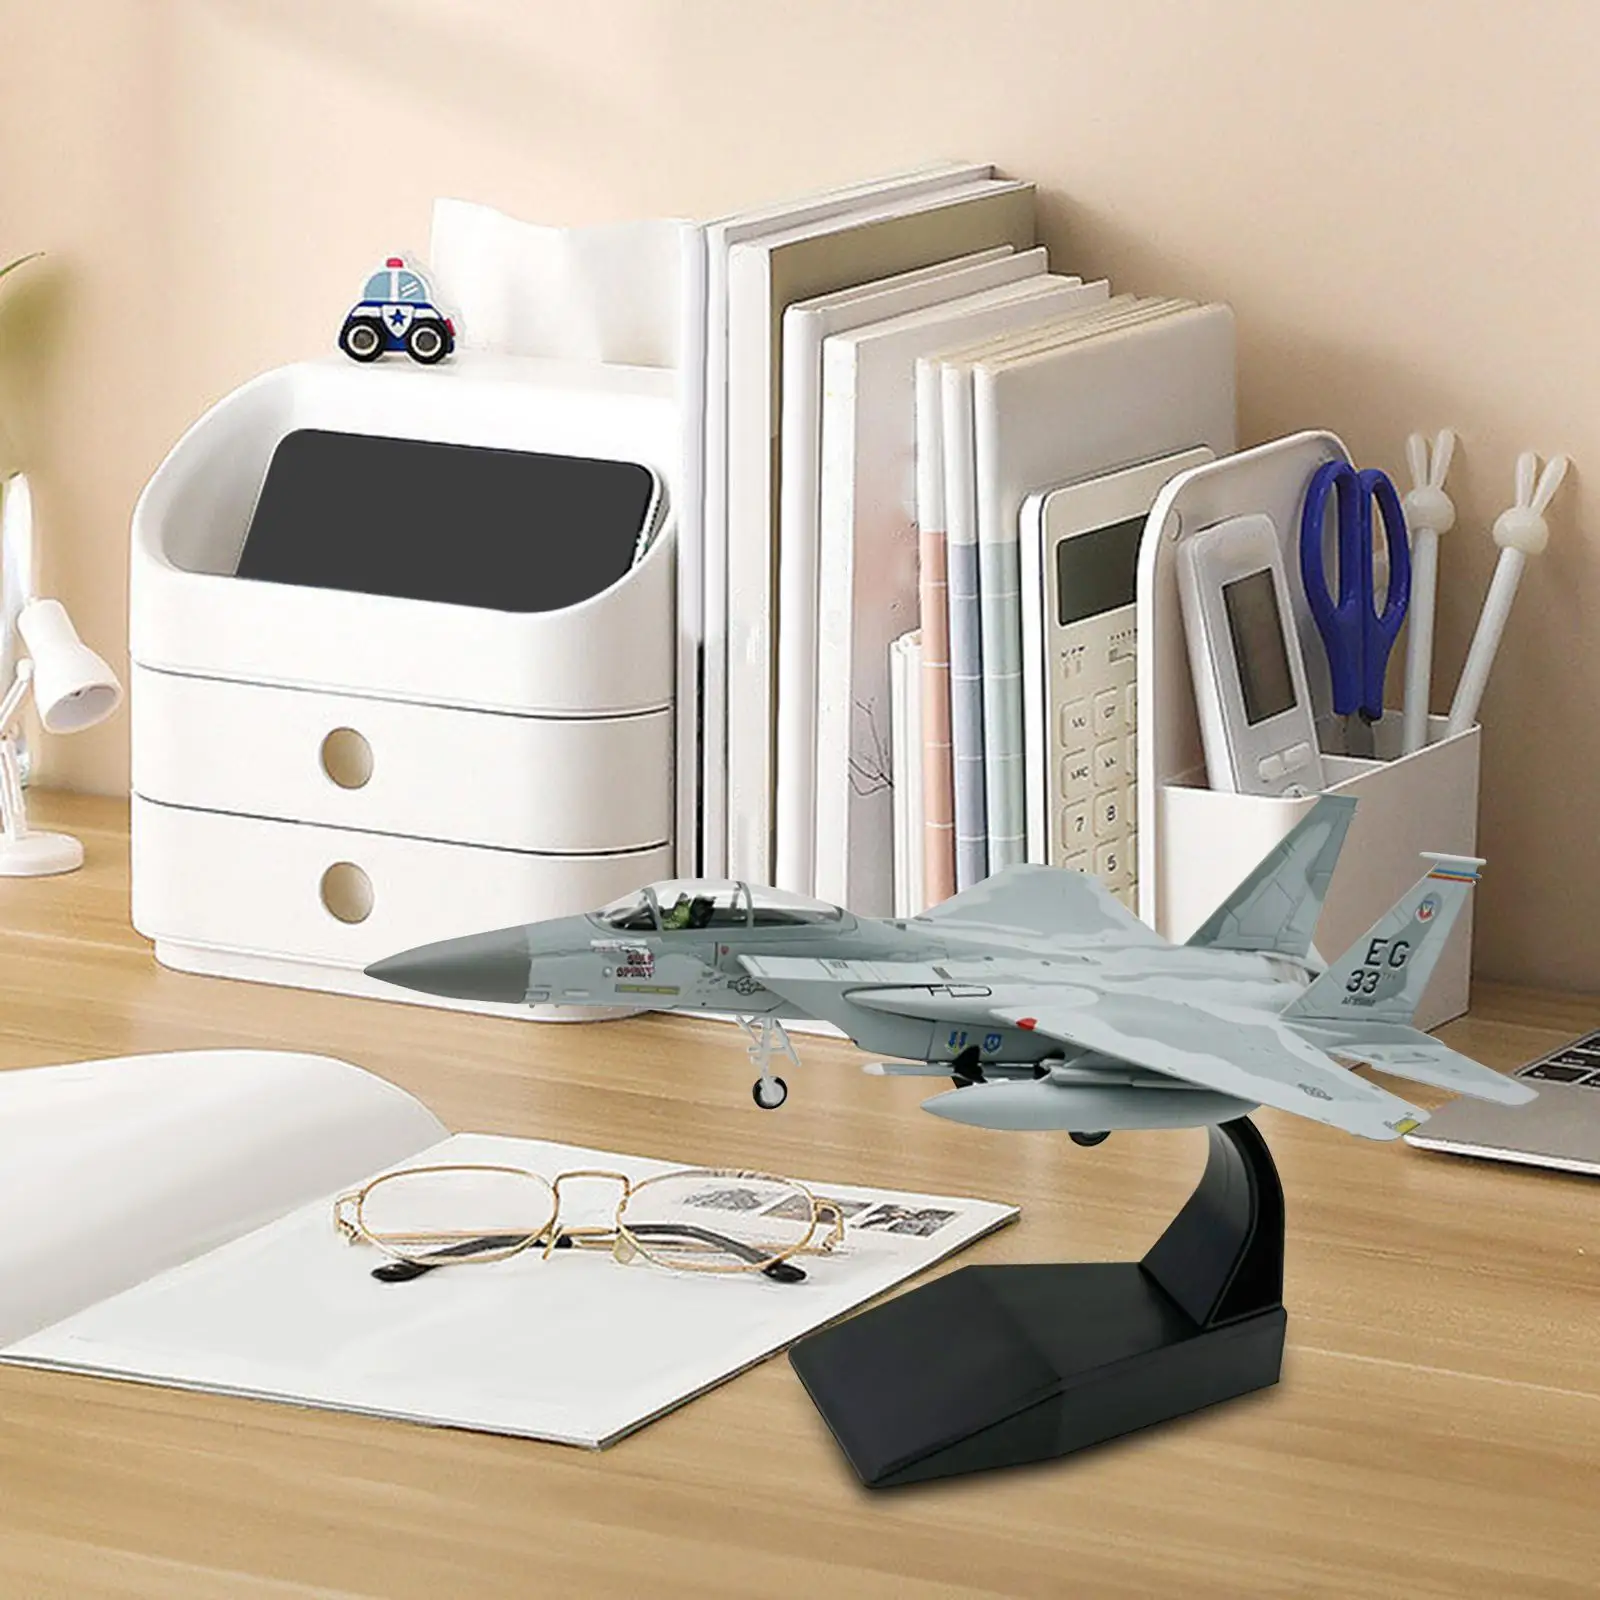 Collectibles Display Plane Simulation Plane Model for Home Decoration Ornament Office Decor Collections Adults Gifts